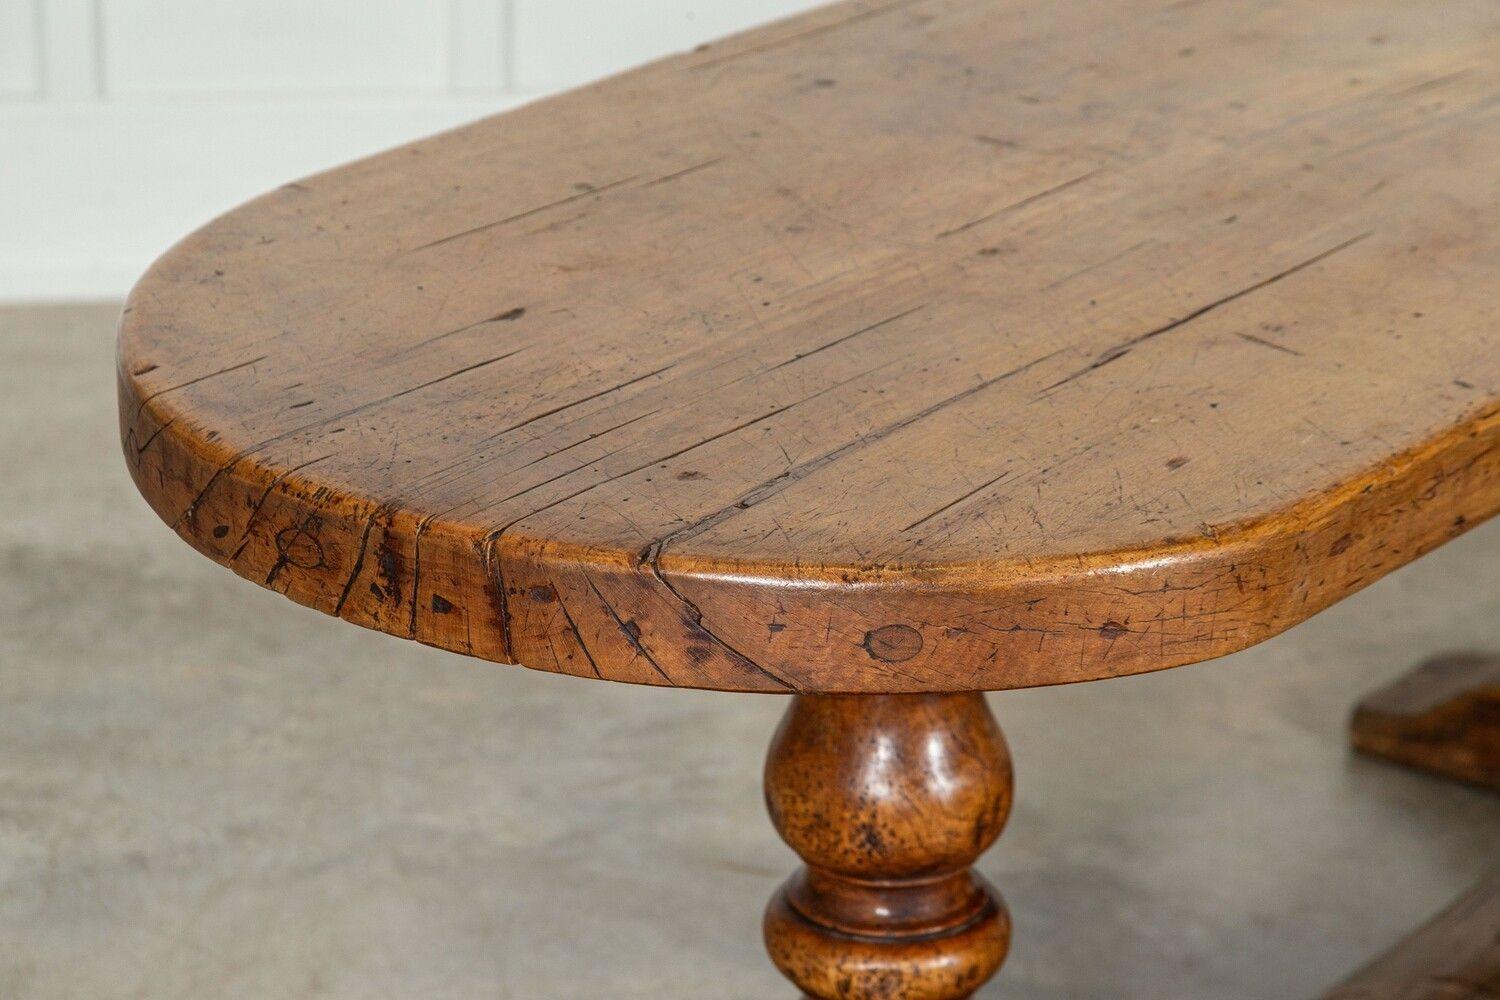 circa 1780
18thC French Elm Refectory Table
sku 1670
An Exceptional Example
W200 x D70 x H75 cm
Knee height 69 cm